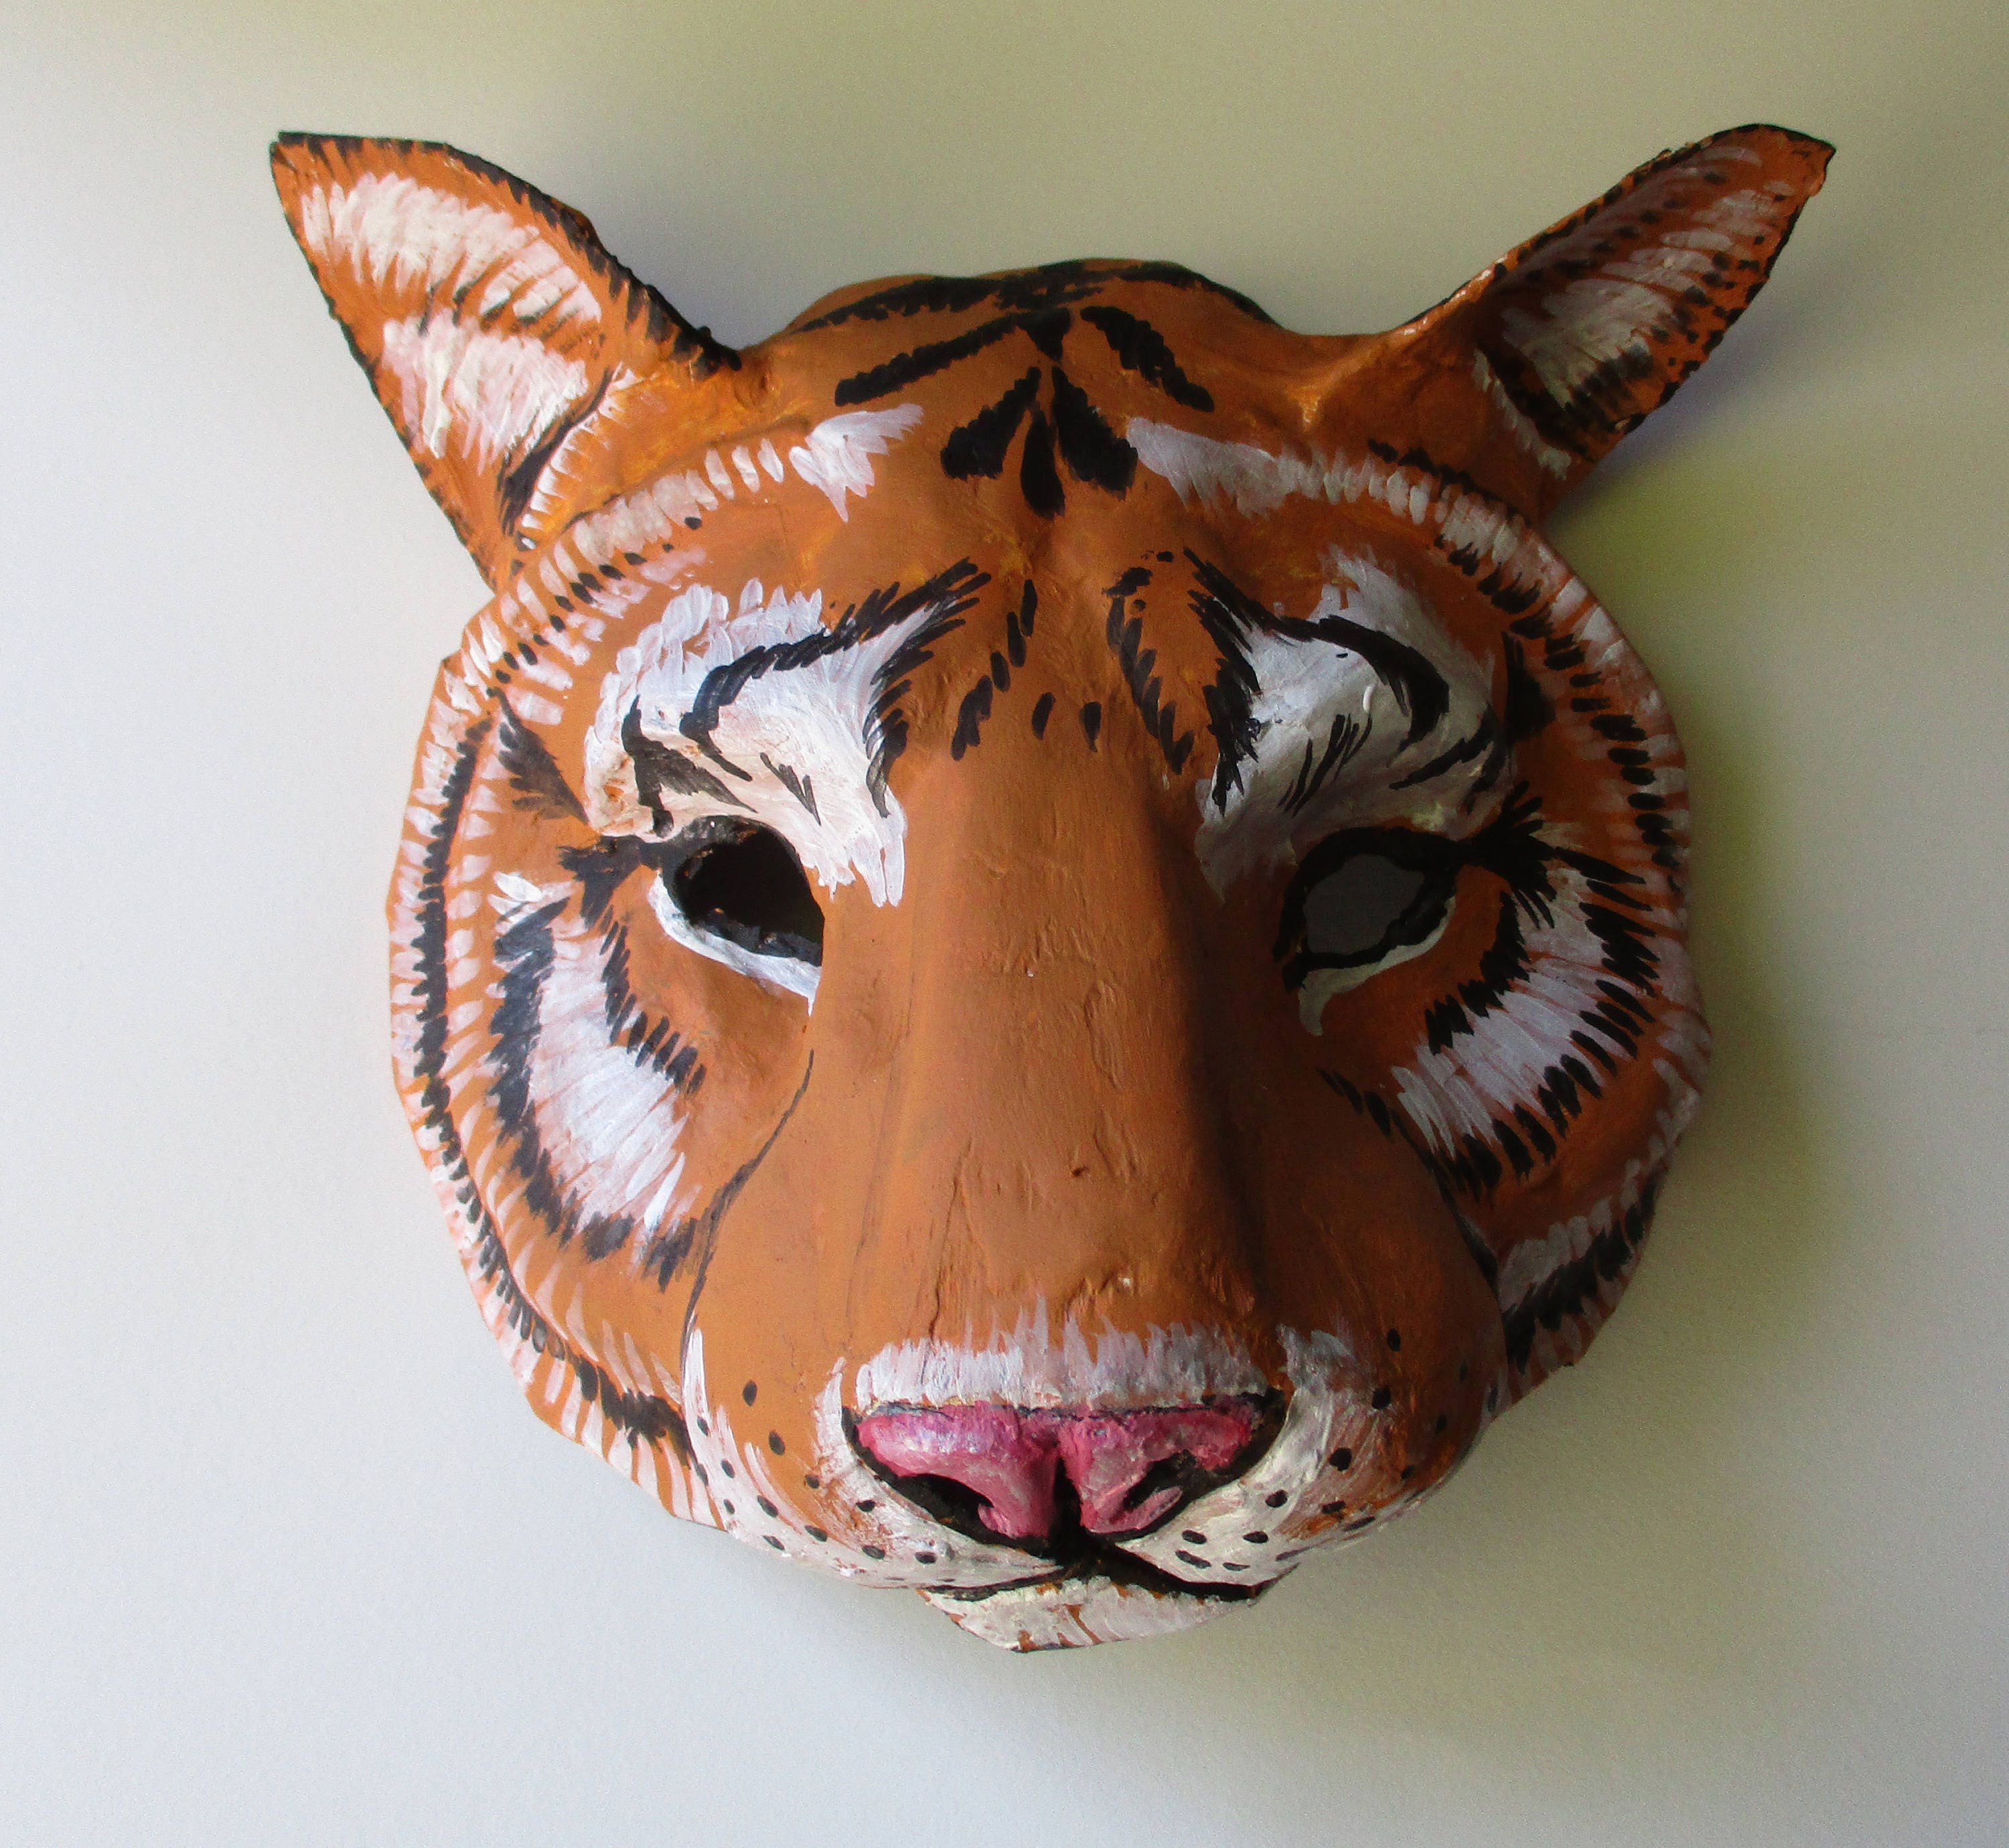 Tiger Animal Face Card Mask Mask-arade Character Impersonation/Fancy Dress 